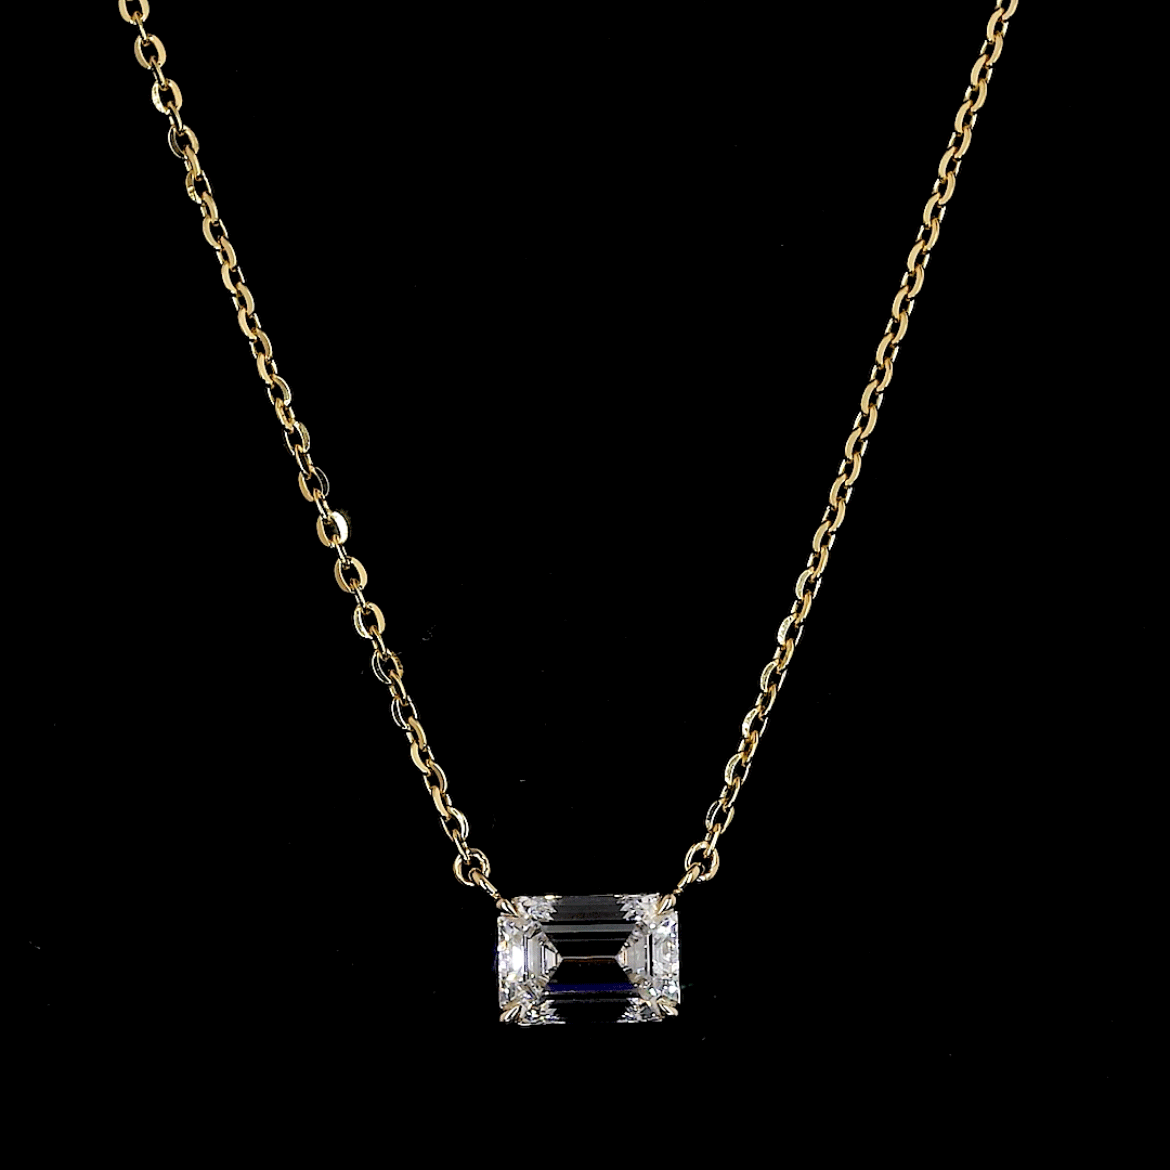 Emerald Cut Lab Diamond Solitaire Necklace - 14K Yellow Gold (3.03ct)